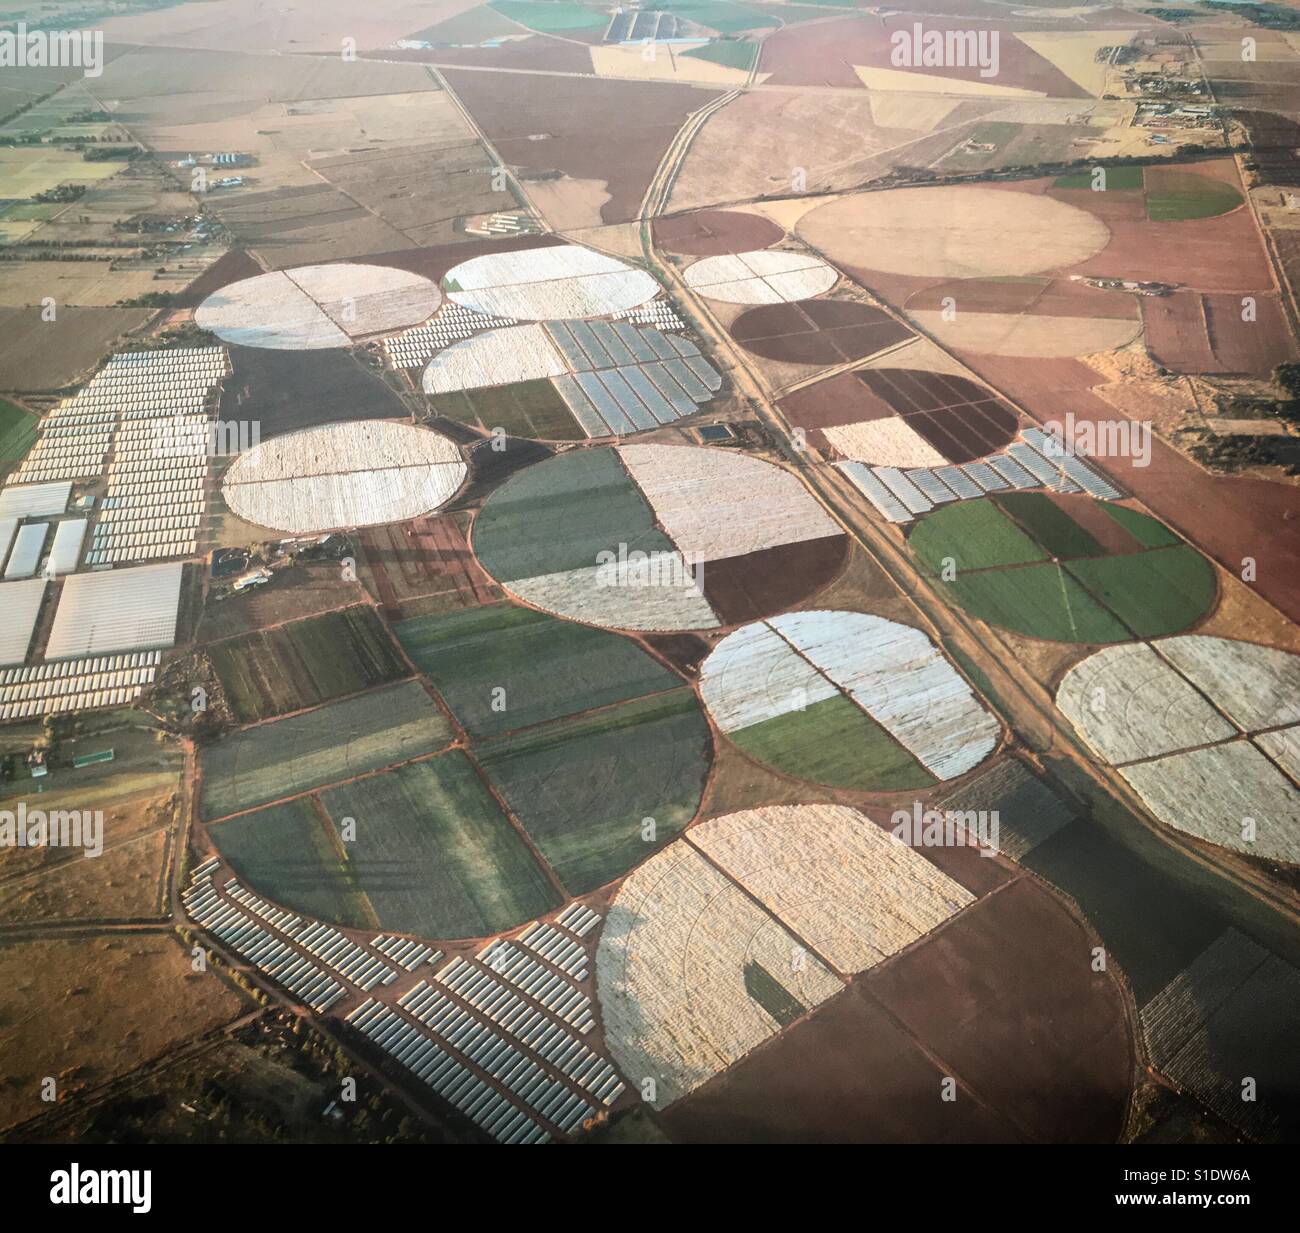 Aerial photo of circular irrigation crop fields on a farm. Stock Photo